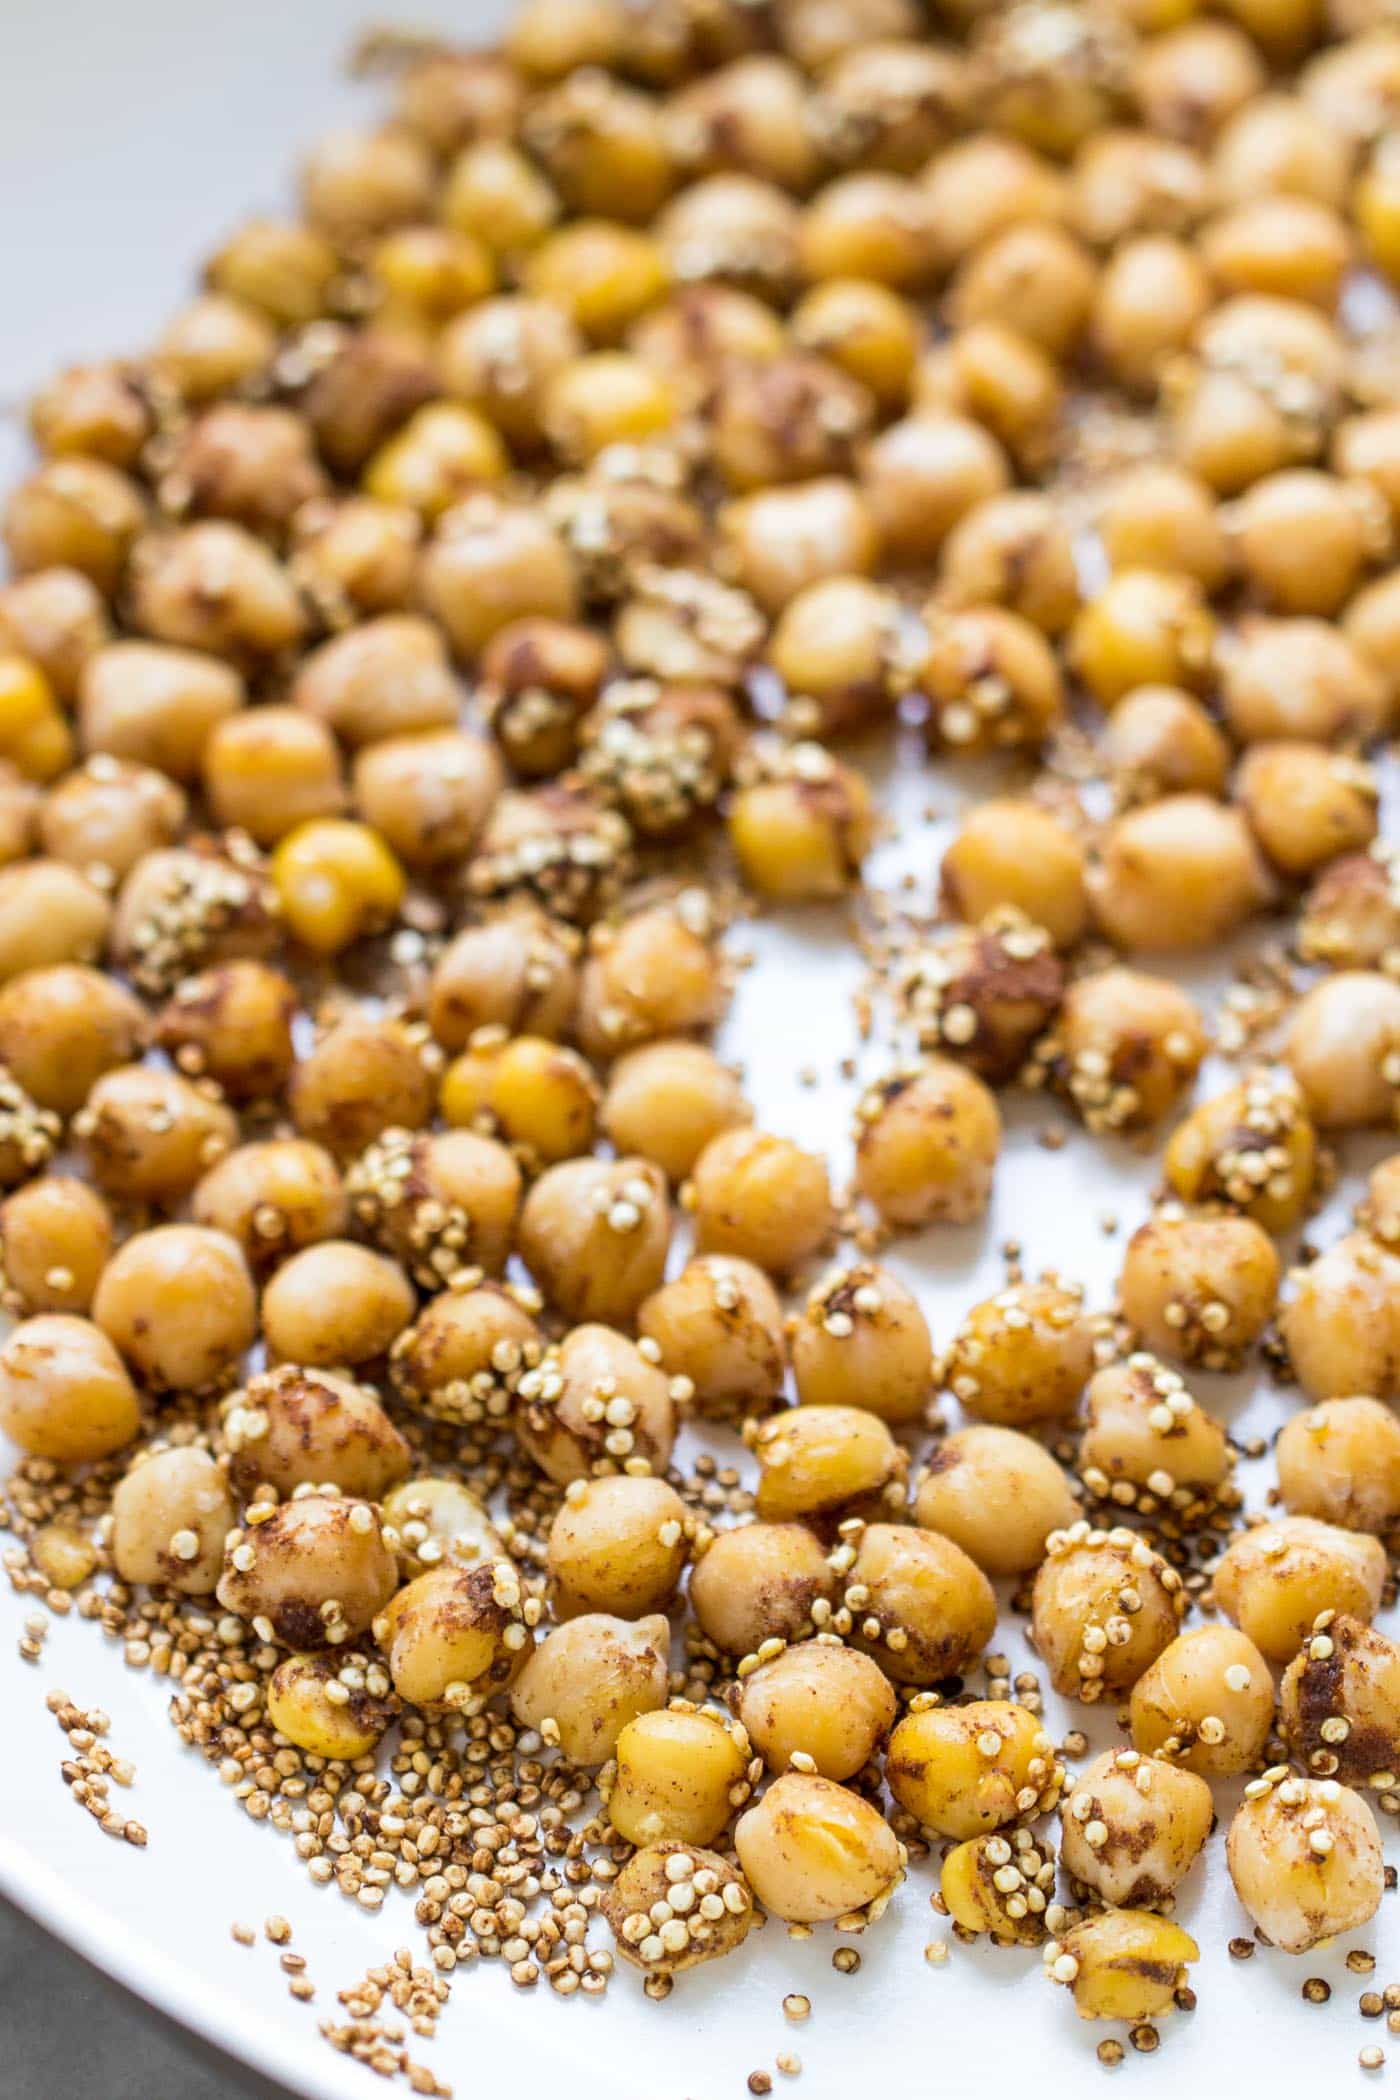 How to make the perfect warm chickpeas -- tossed in a bag with a little oil, tons of spices and then sauteed in a pan. Simple, easy, DELISH!